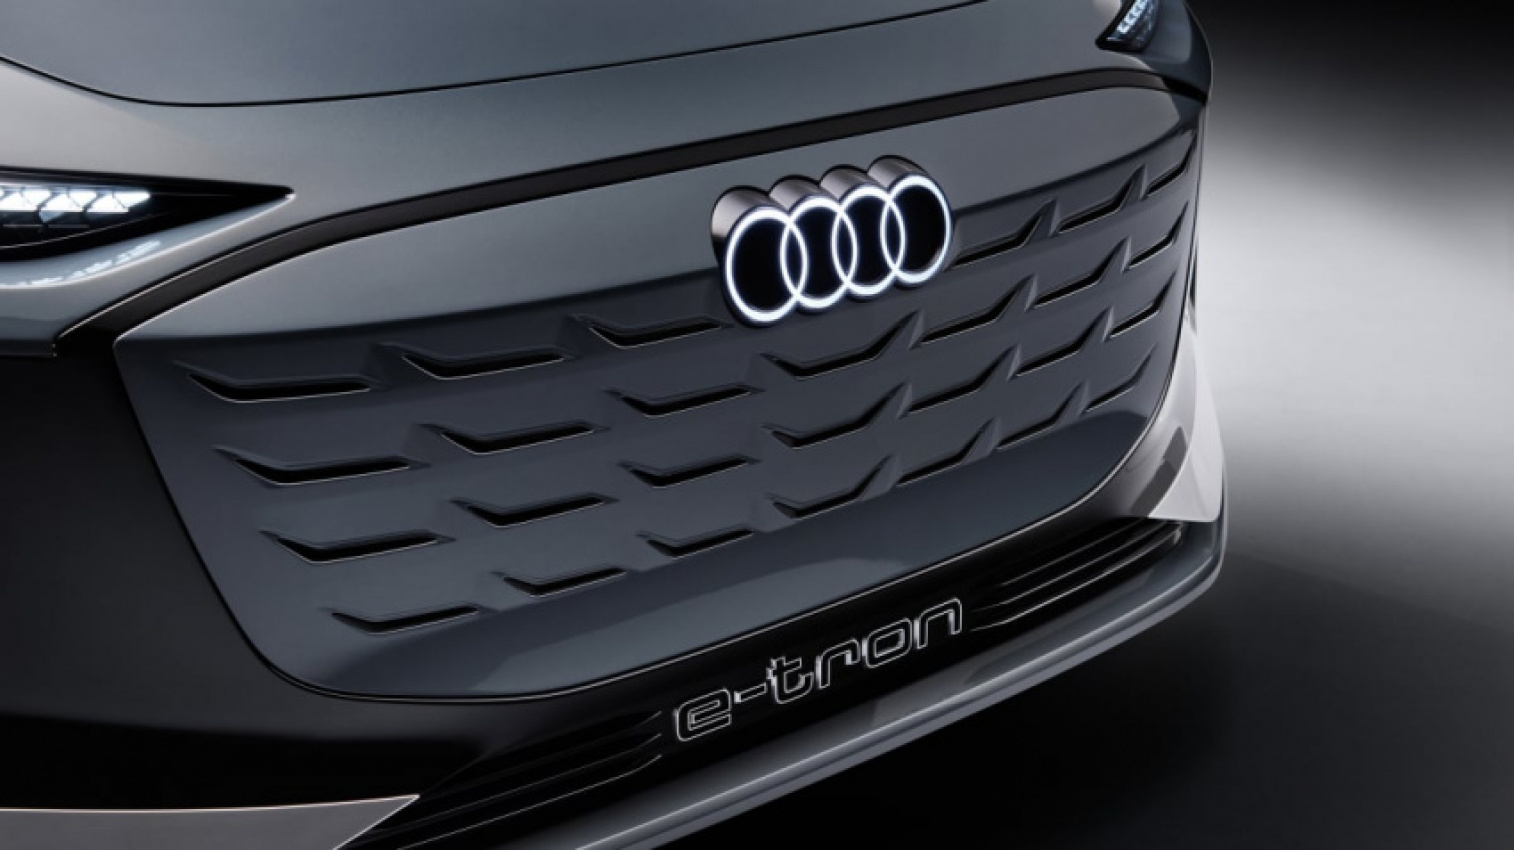 audi, autos, cars, audi ute under consideration, electric power likely